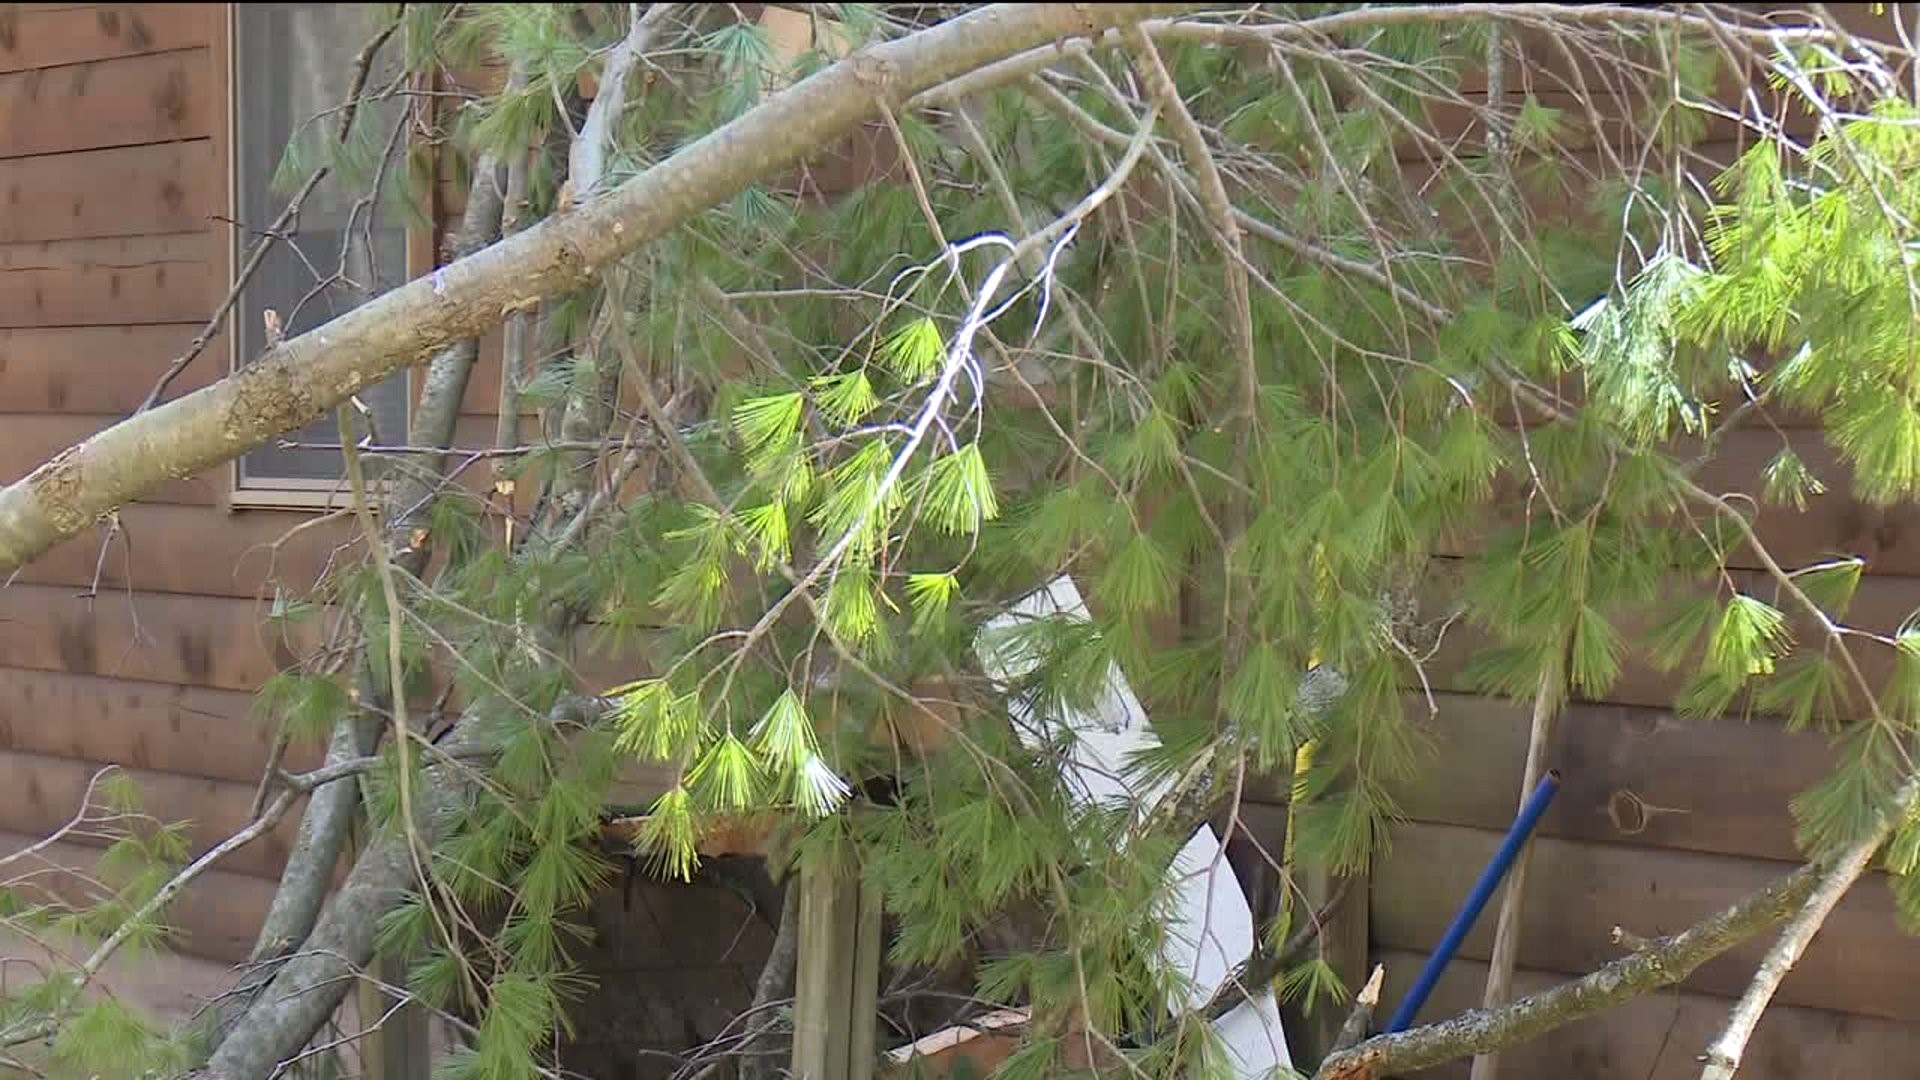 Storm Damage, Power Problems after Windy Wednesday